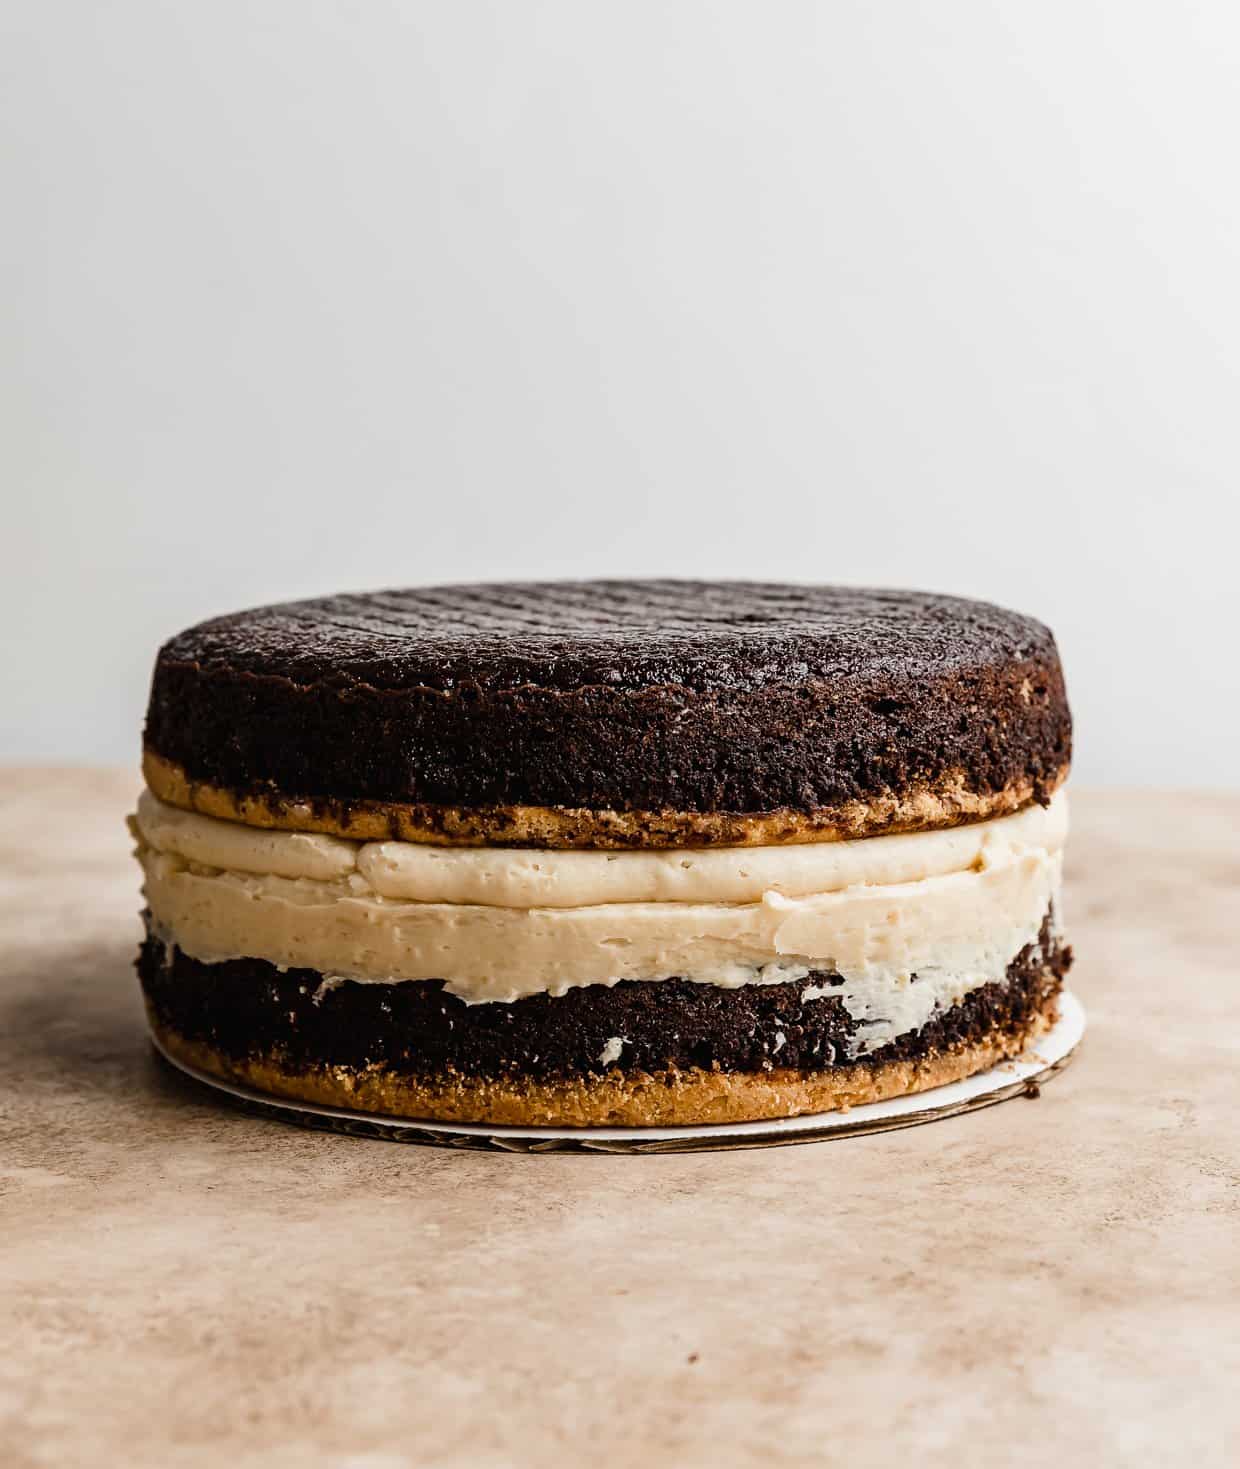 Two layers of chocolate cake on top of each other, against a white background.